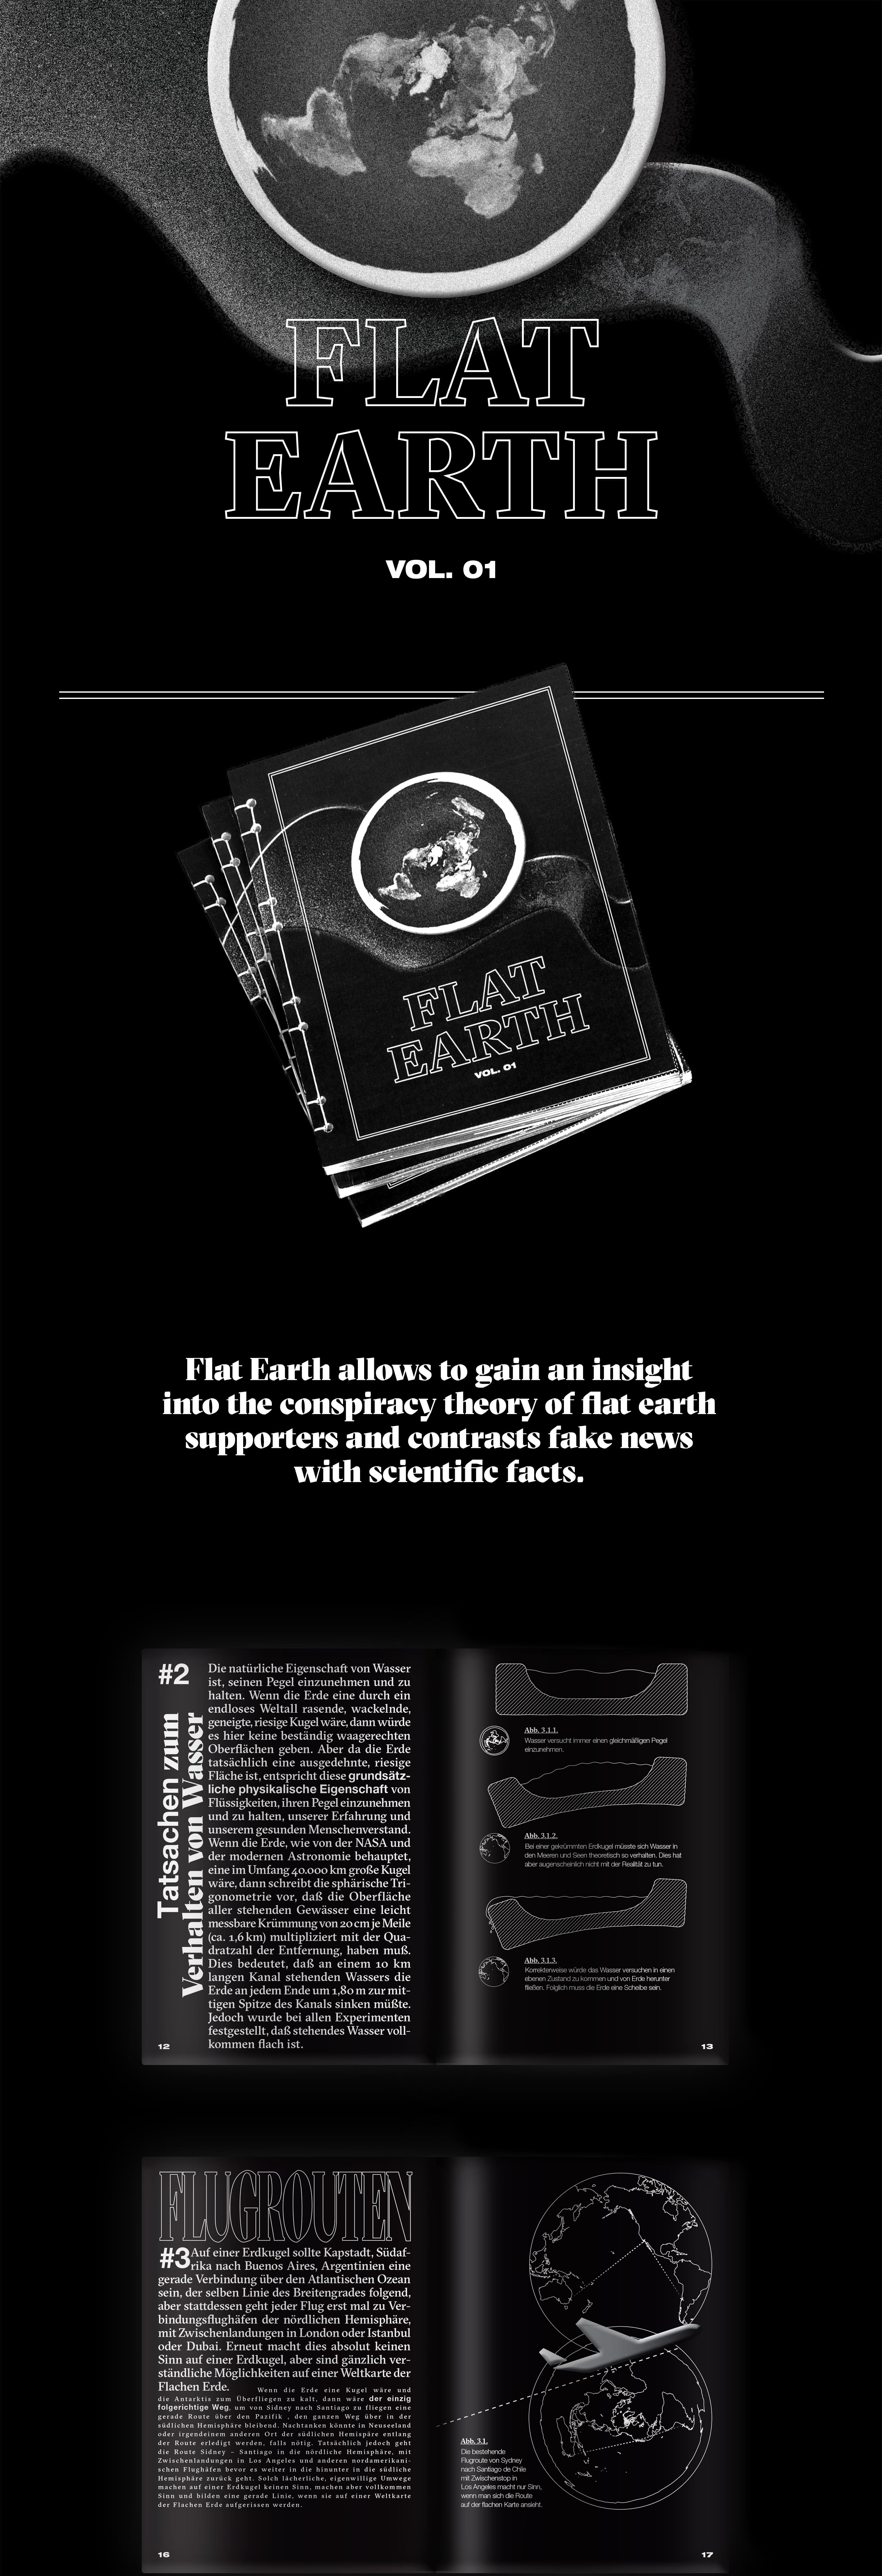 Detailed images of the project Flat Earth. 